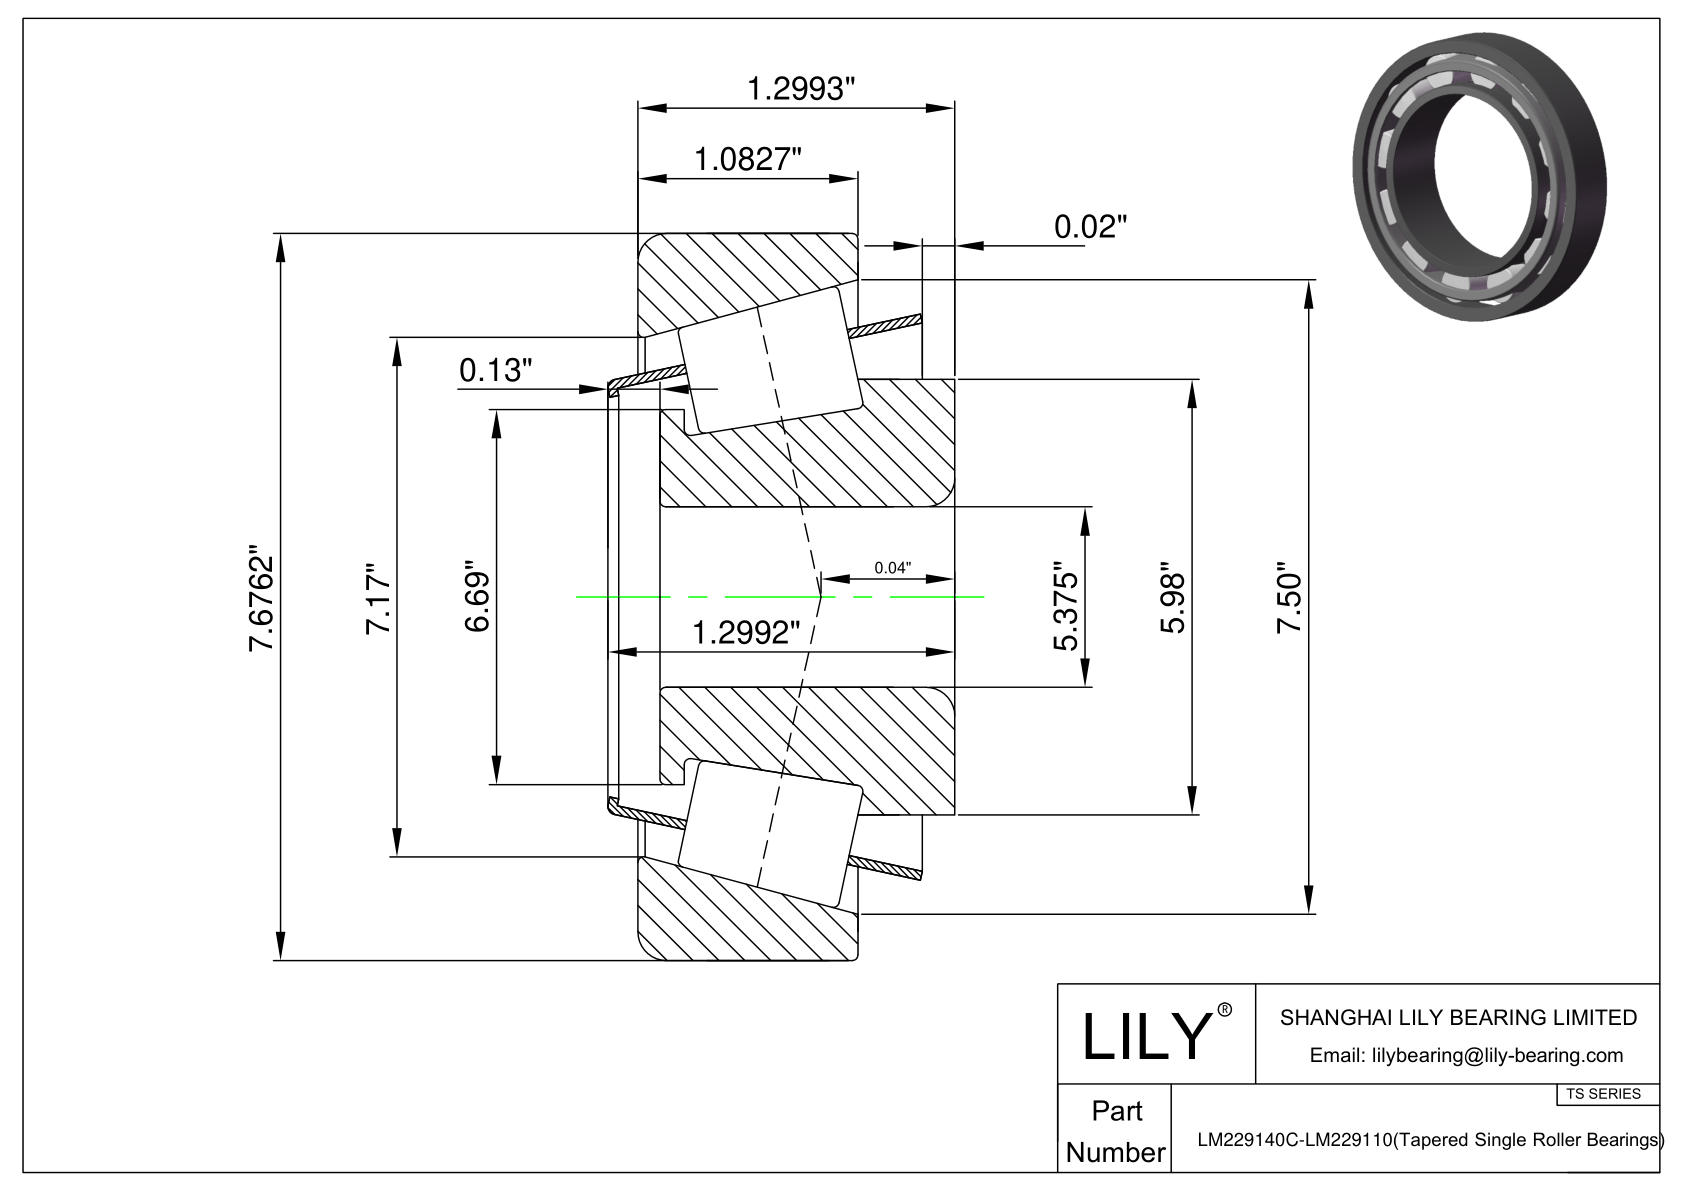 LM229140C-LM229110 TS (Tapered Single Roller Bearings) (Imperial) cad drawing